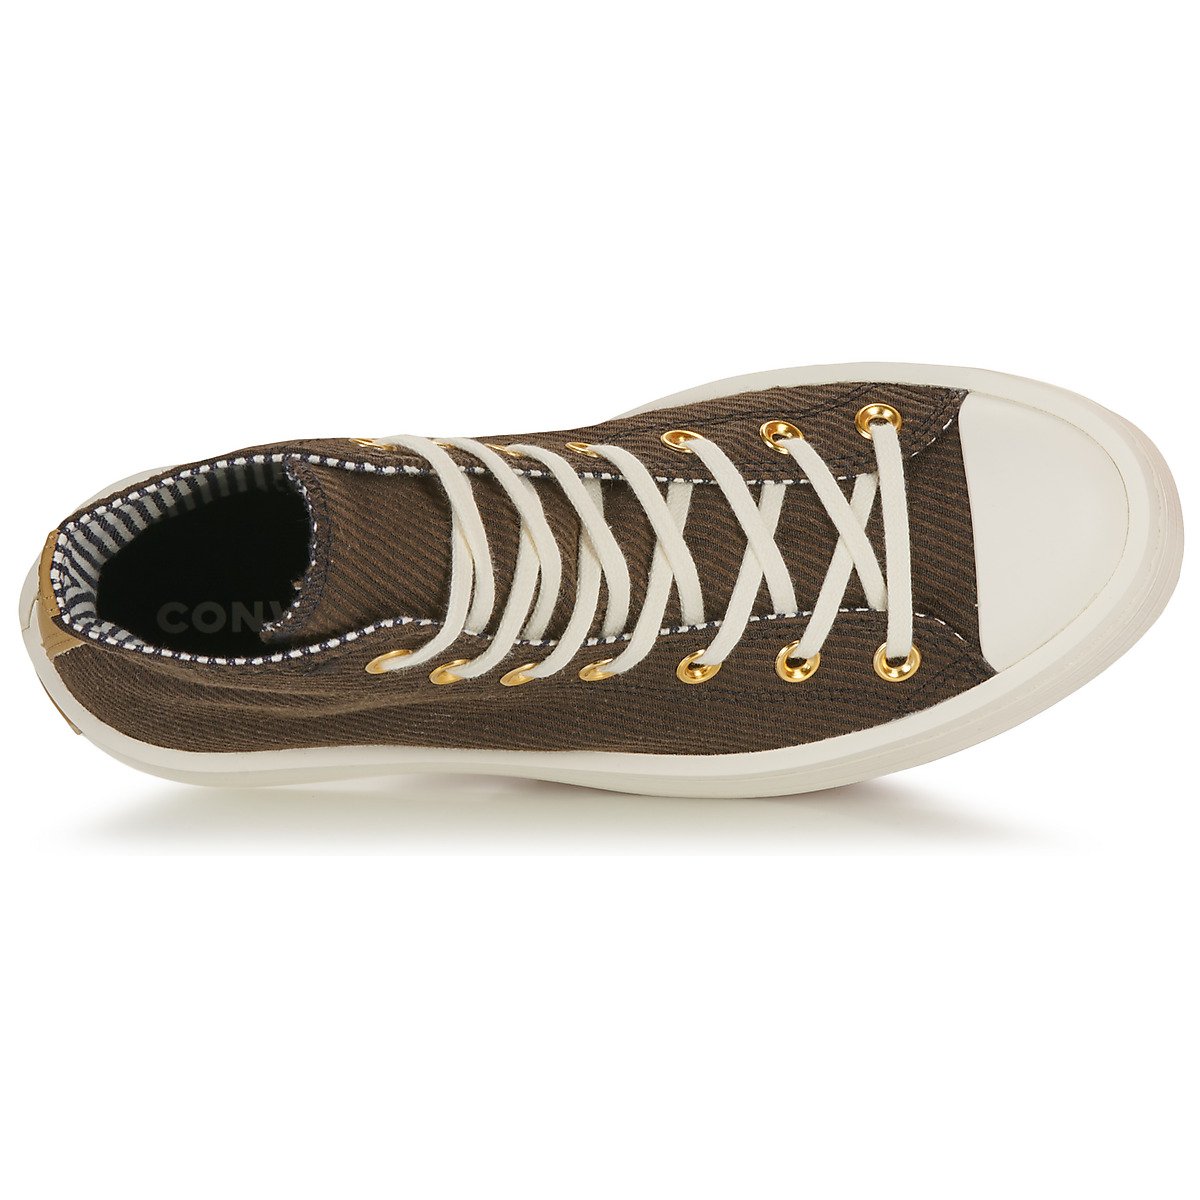 Shoes (High-top Trainers) CHUCK TAYLOR ALL STAR MODERN LIFT